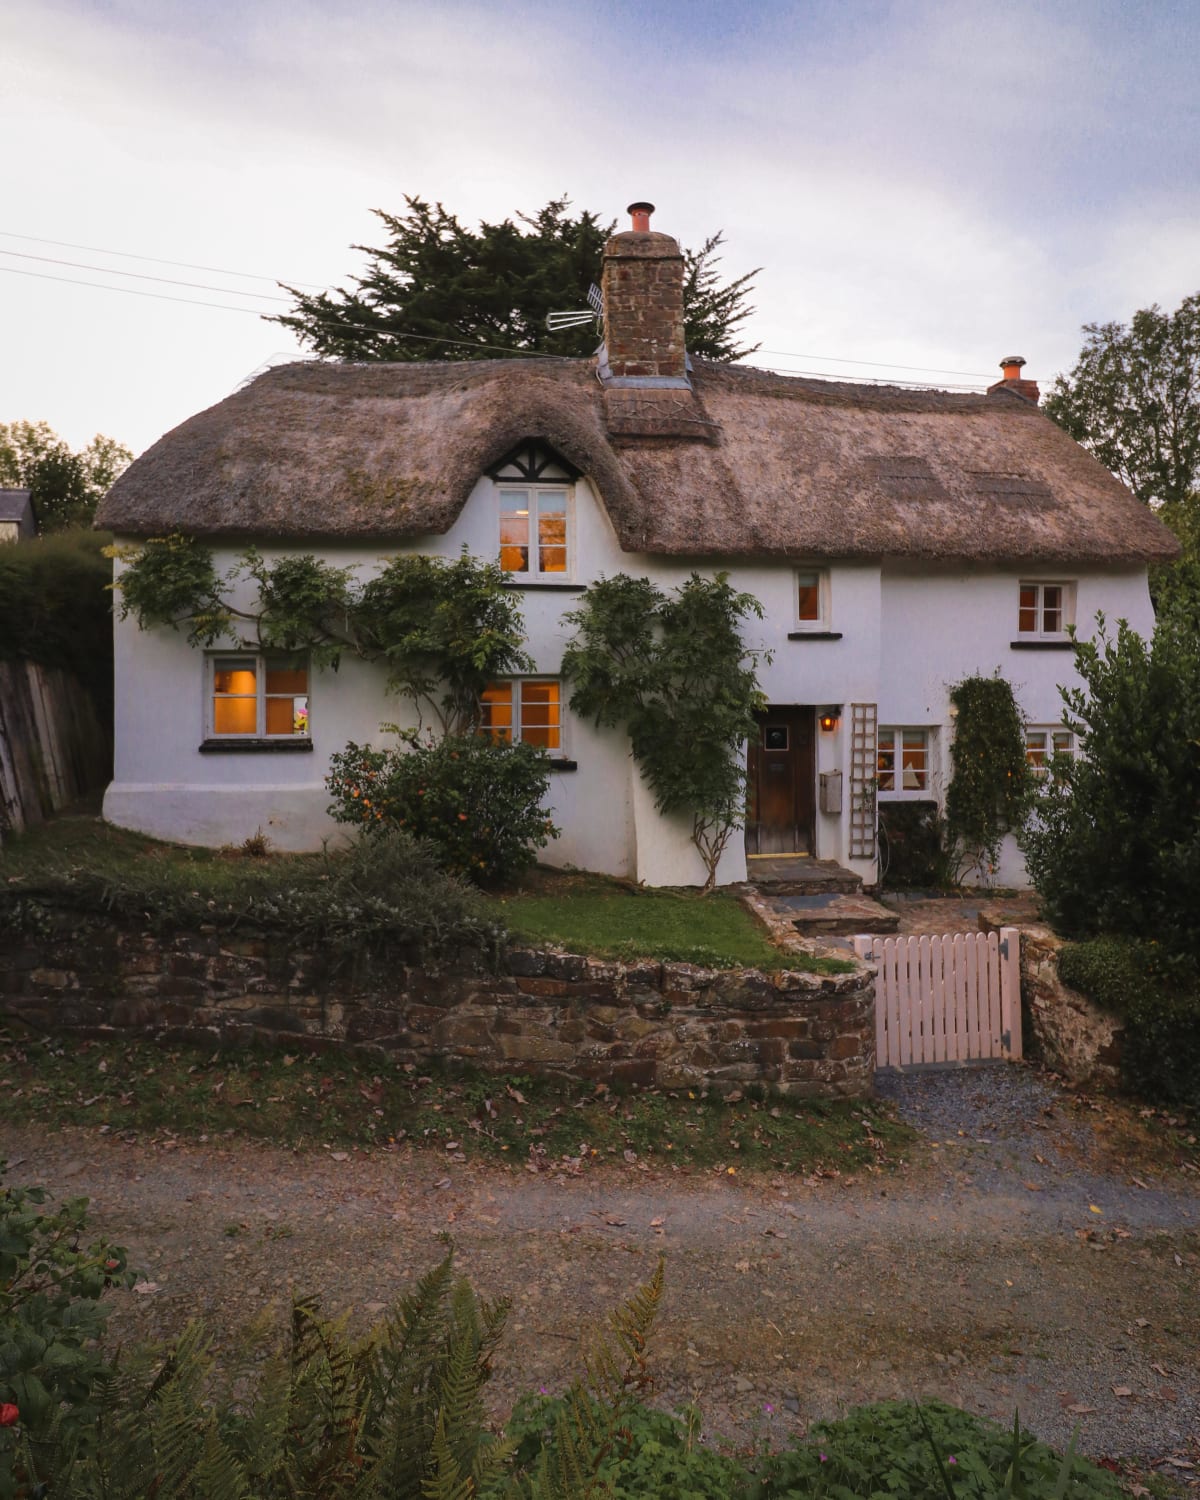 The thatched cottage I rented in Devon at the weekend.